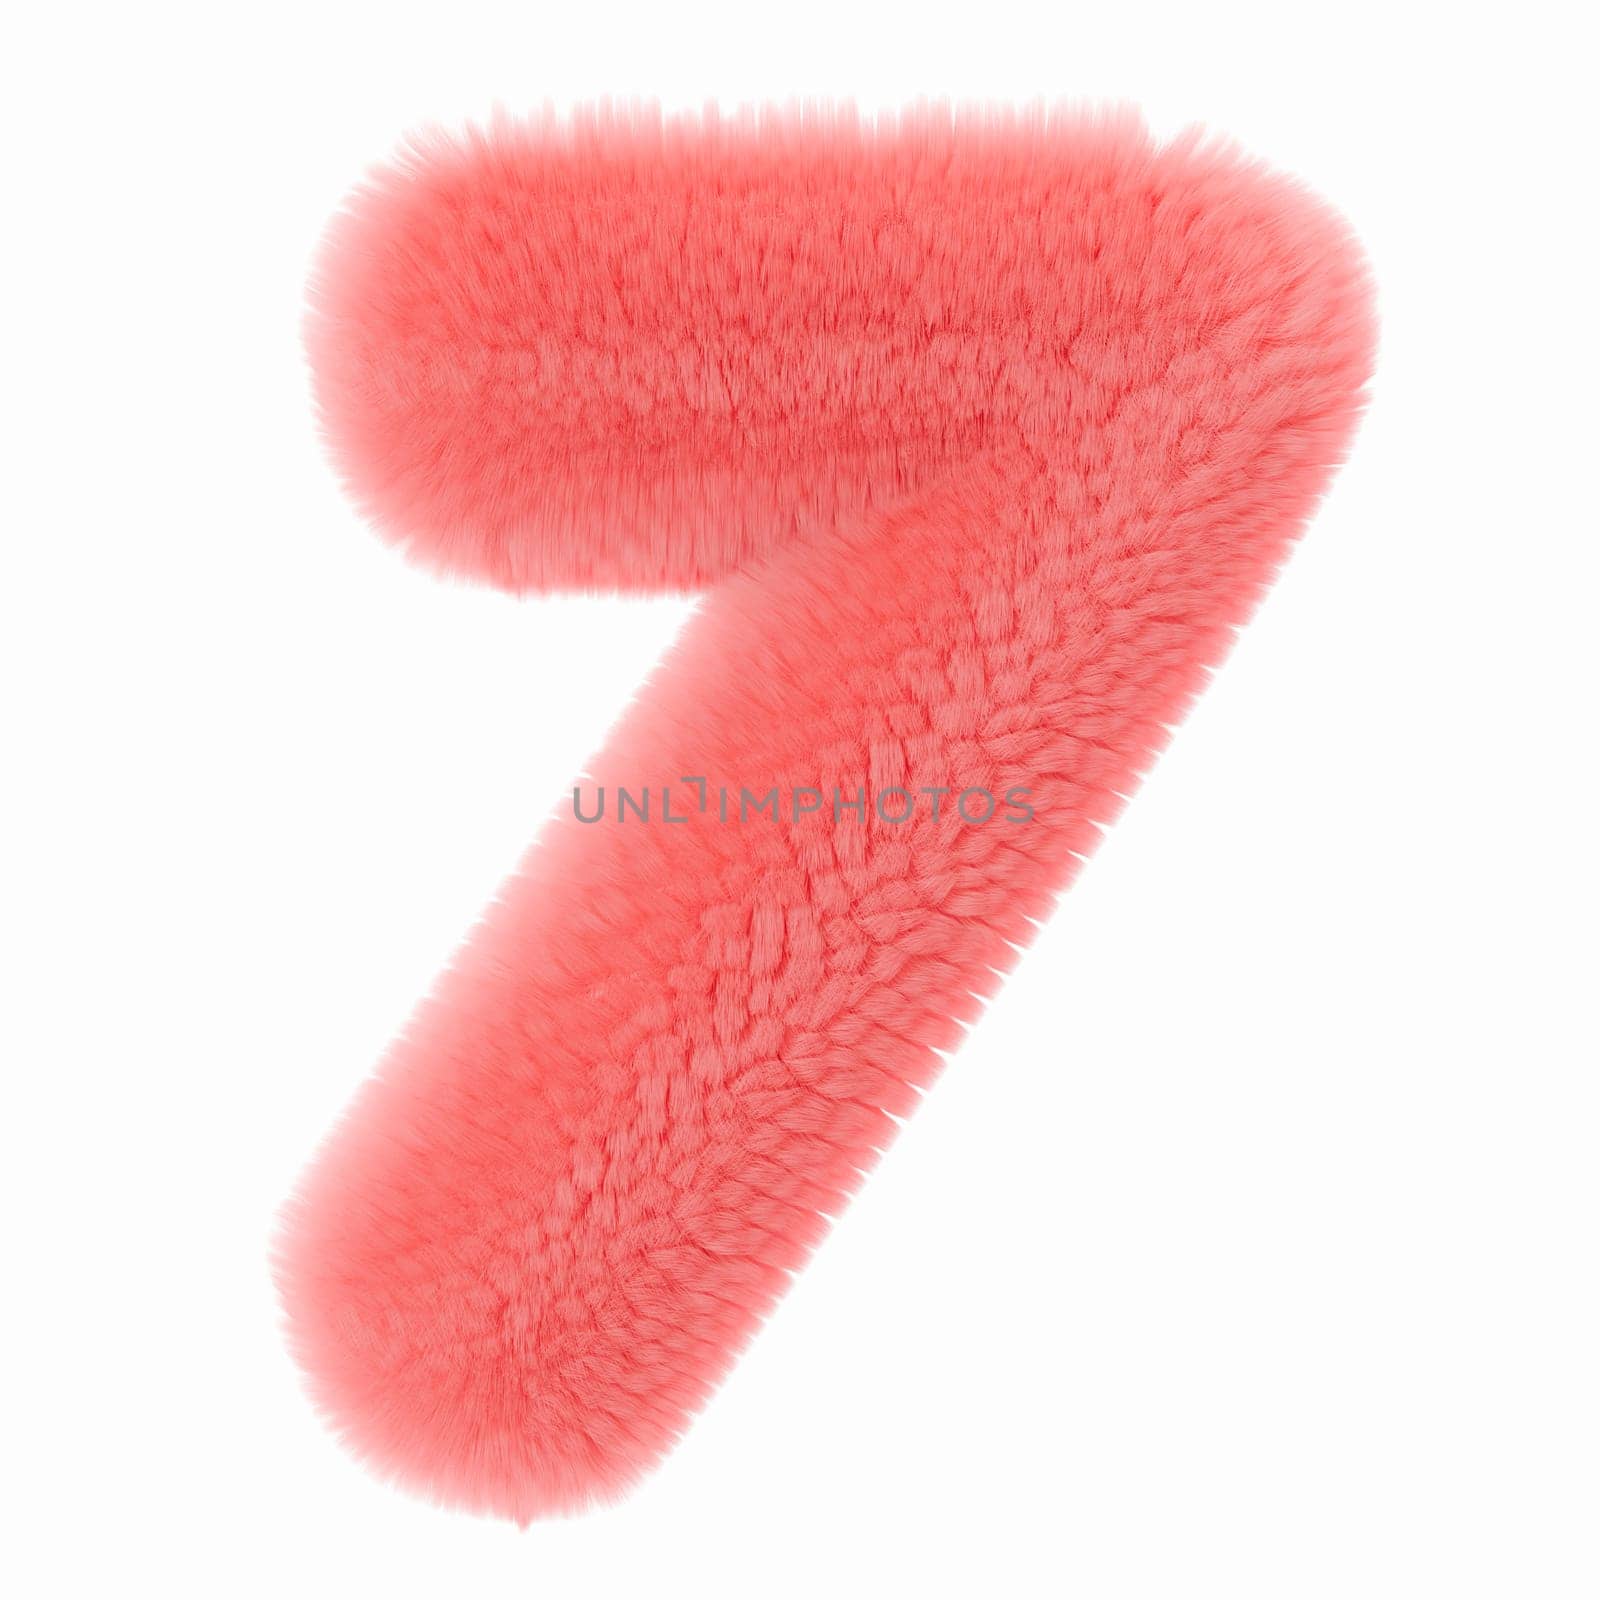 Pink and fluffy 3D number seven, isolated on white background. Furry, soft and hairy symbol 7. Trendy, cute design element. Cut out object. 3D rendering